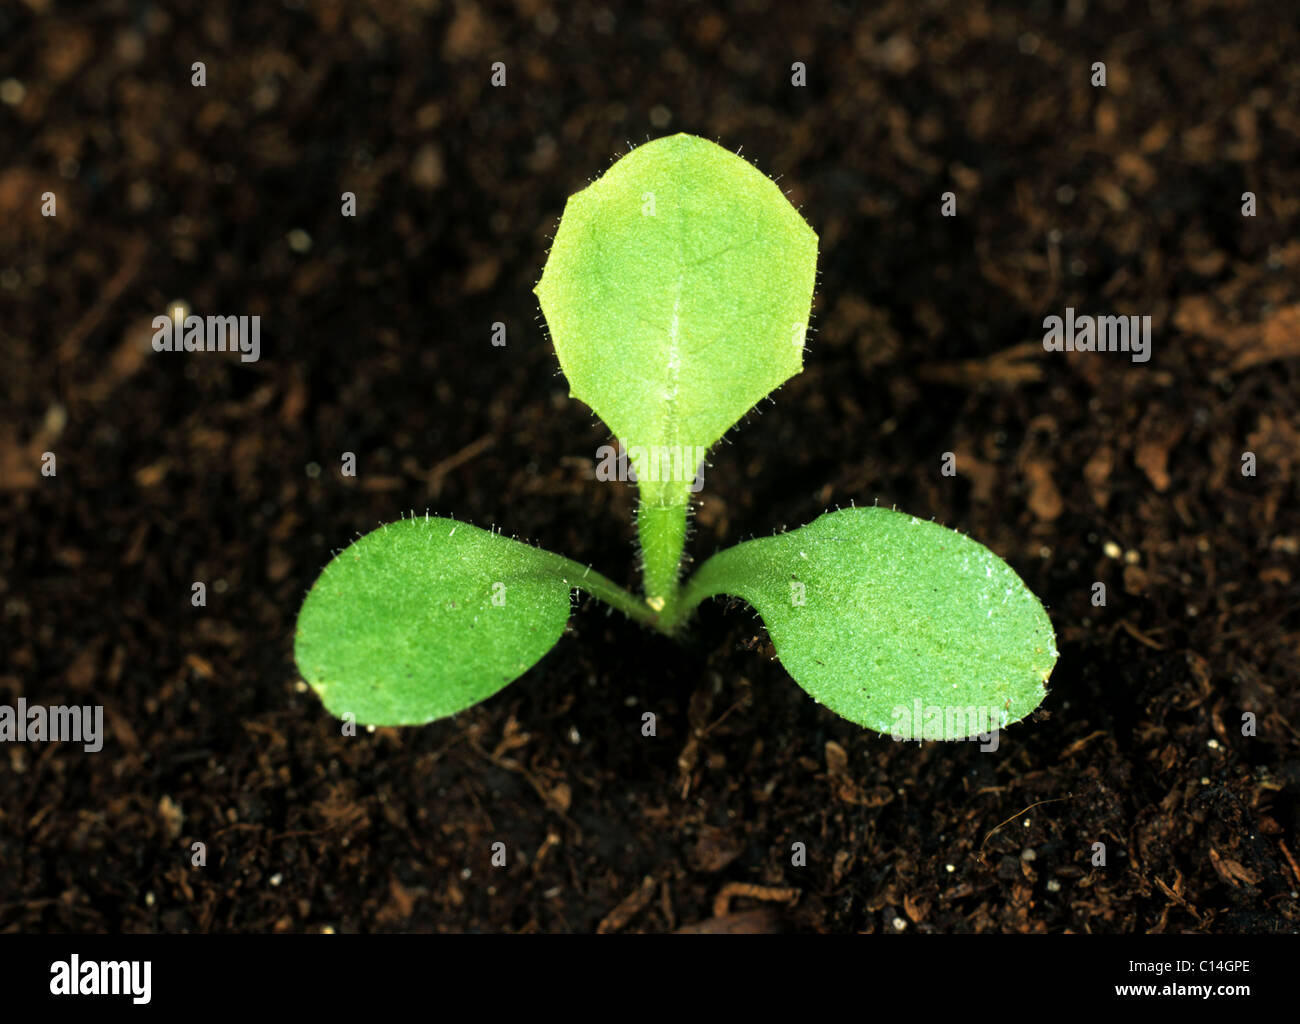 Great lettuce (Lactuca virosa) seedling with one true leaf forming Stock Photo